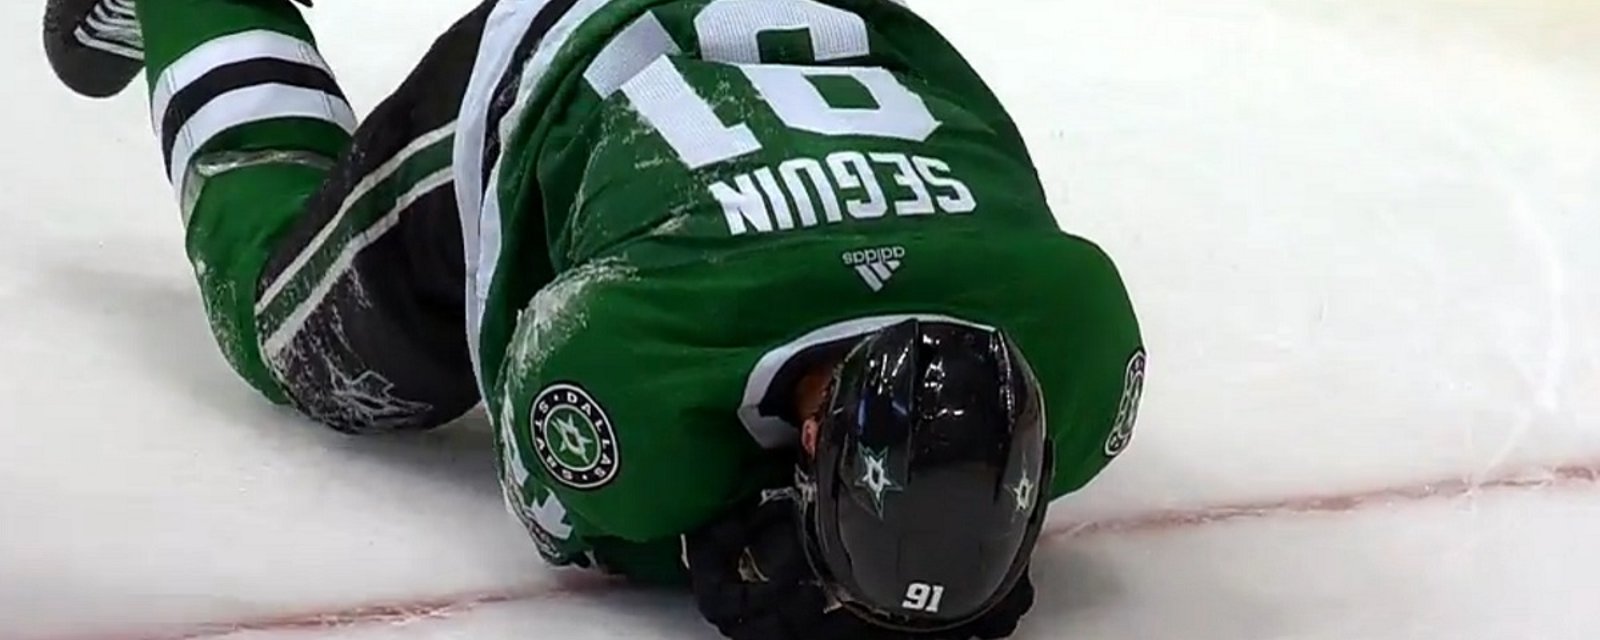 James Neal returns from injury and destroys Tyler Seguin with a huge hit.